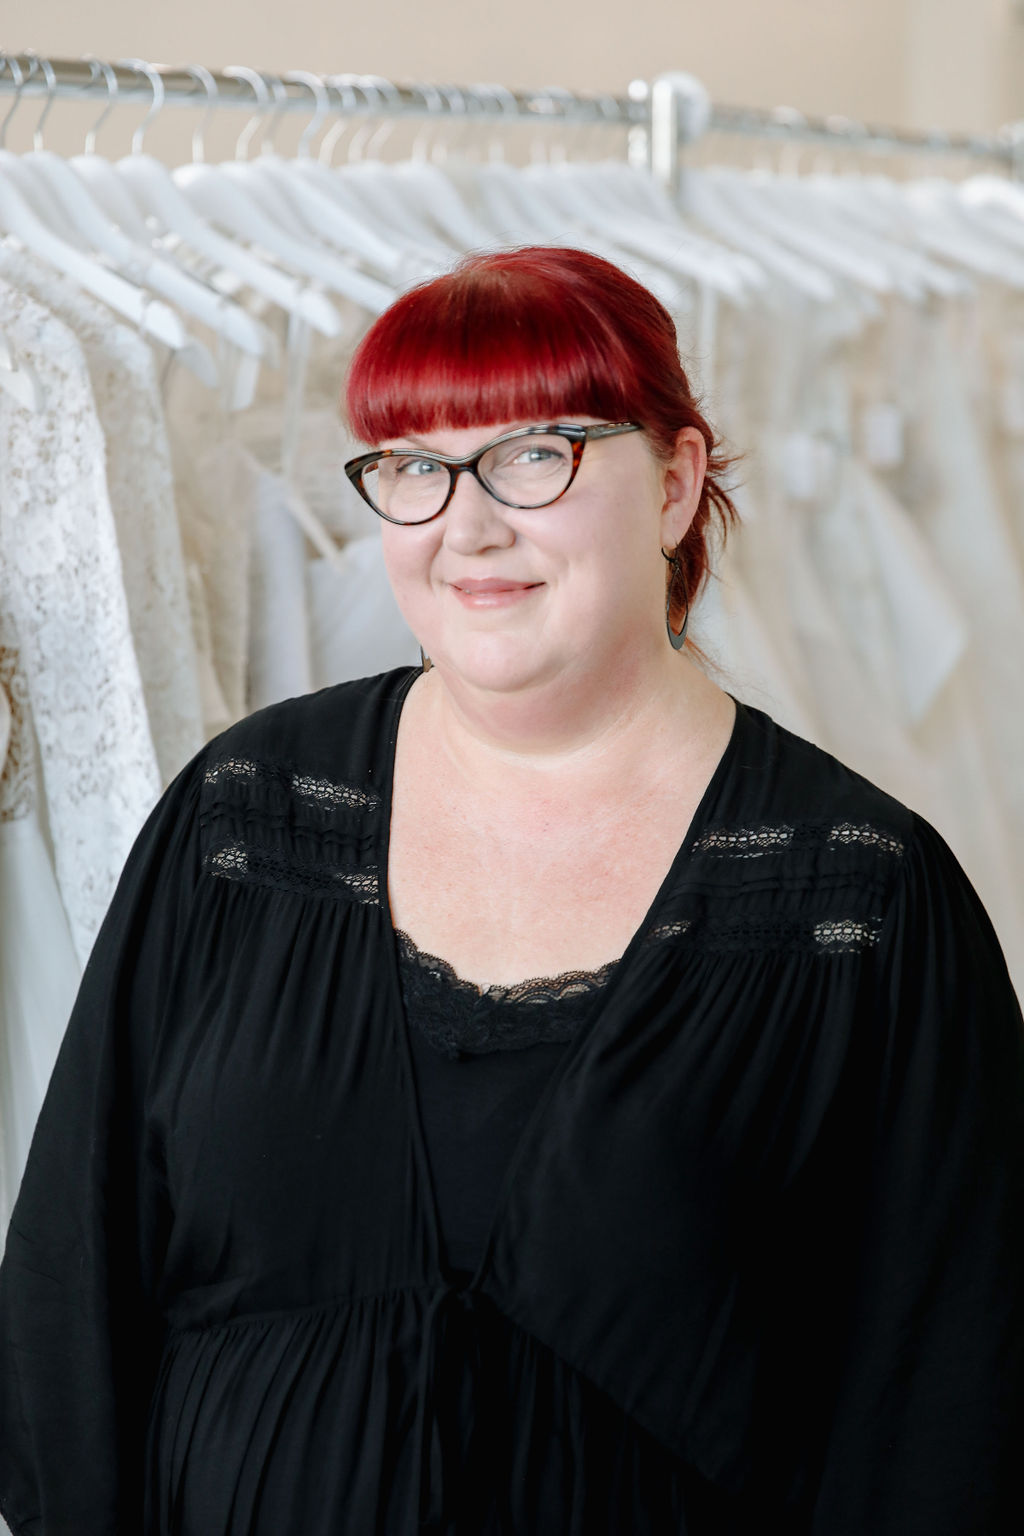 Meet The Staff | Brides For a Cause